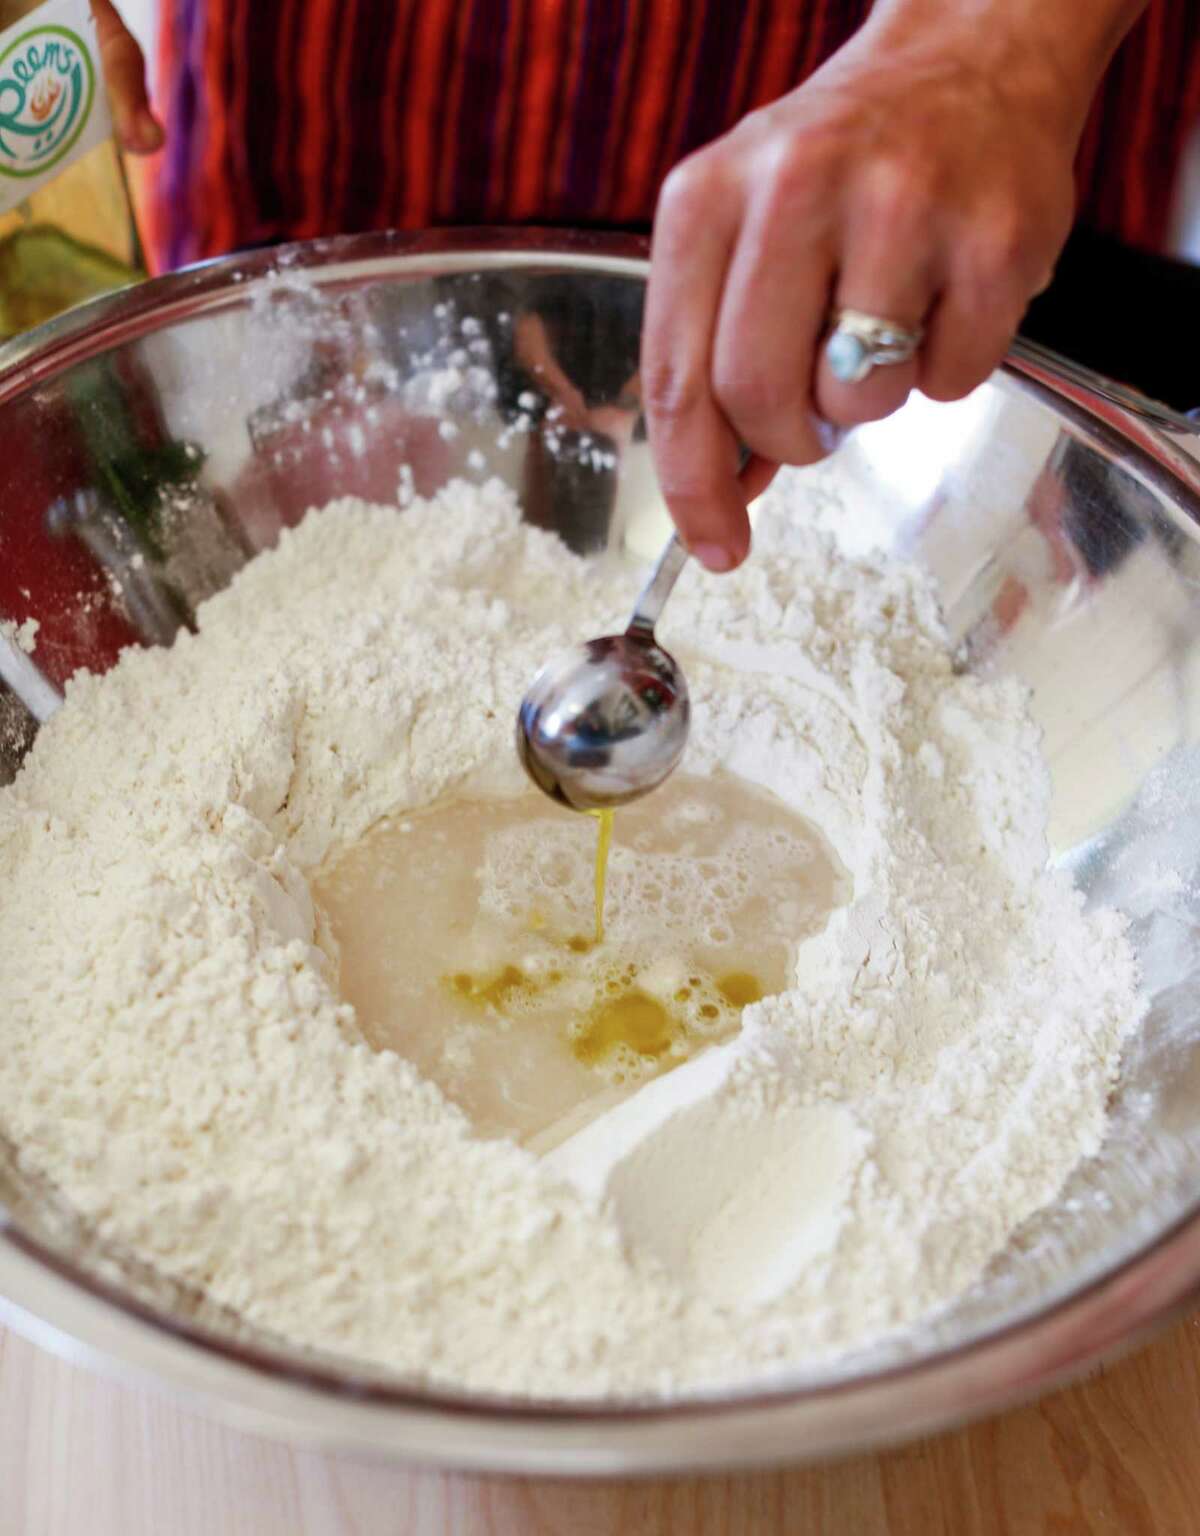 Reem Assil adds olive oil to a mixture of dry ingredients and water to make man’oushe, a Lebanese flatbread.